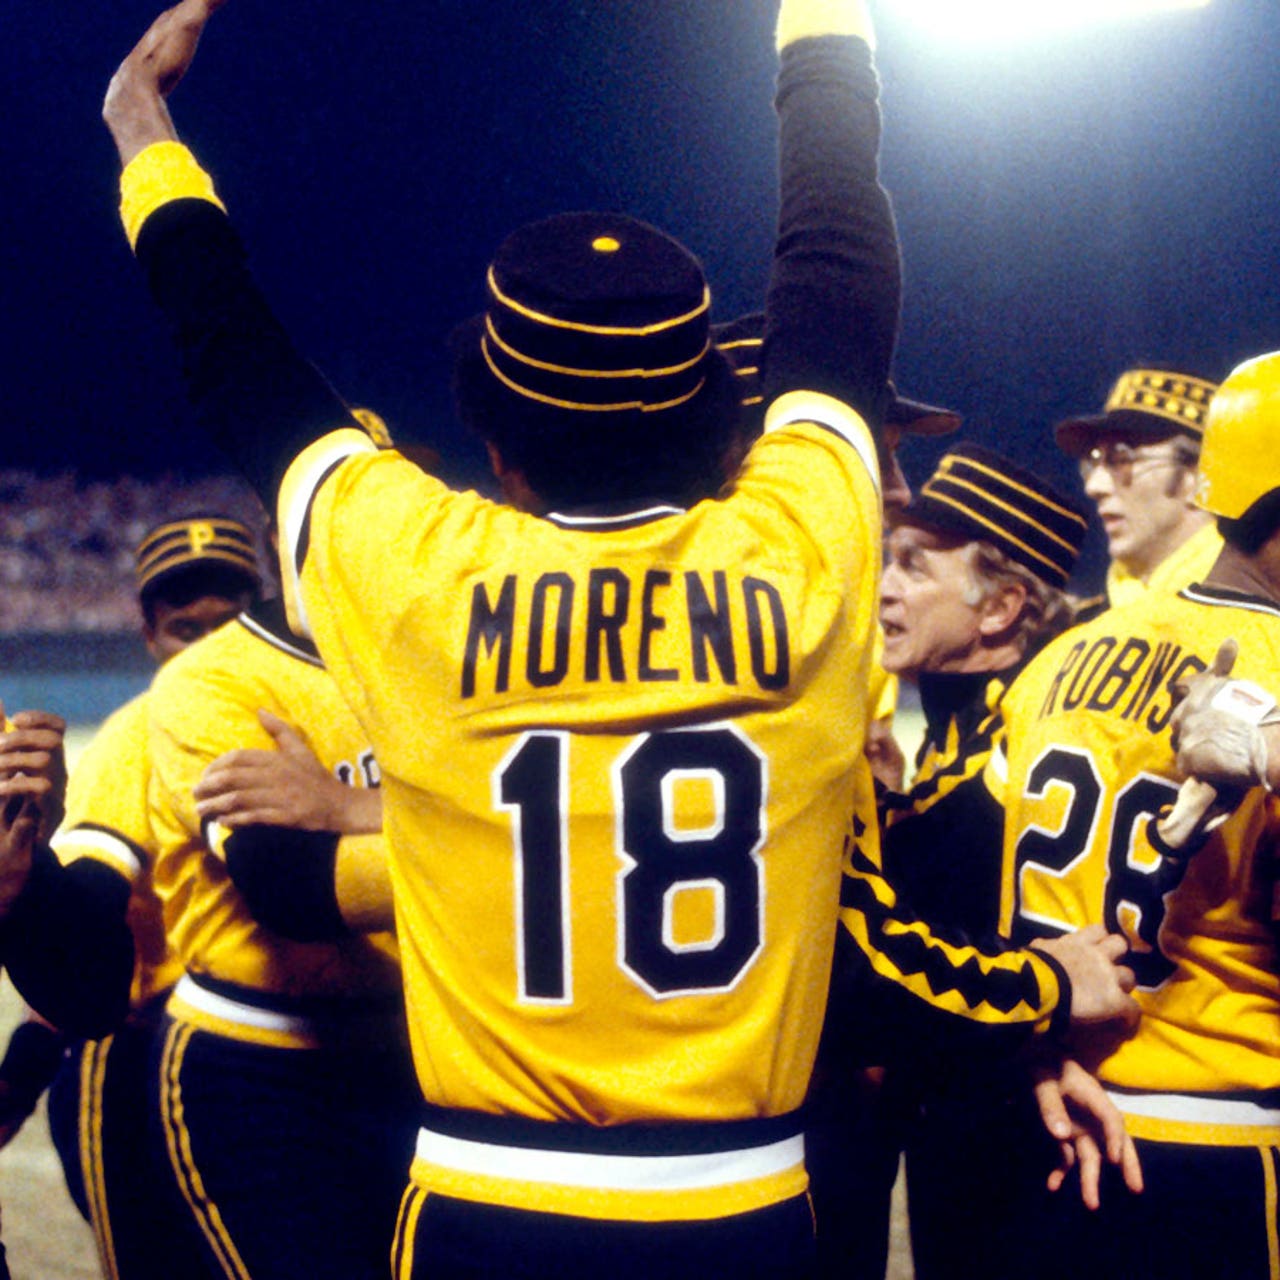 Pittsburgh Pirates to wear 1979 uniforms for Sunday games - Sports